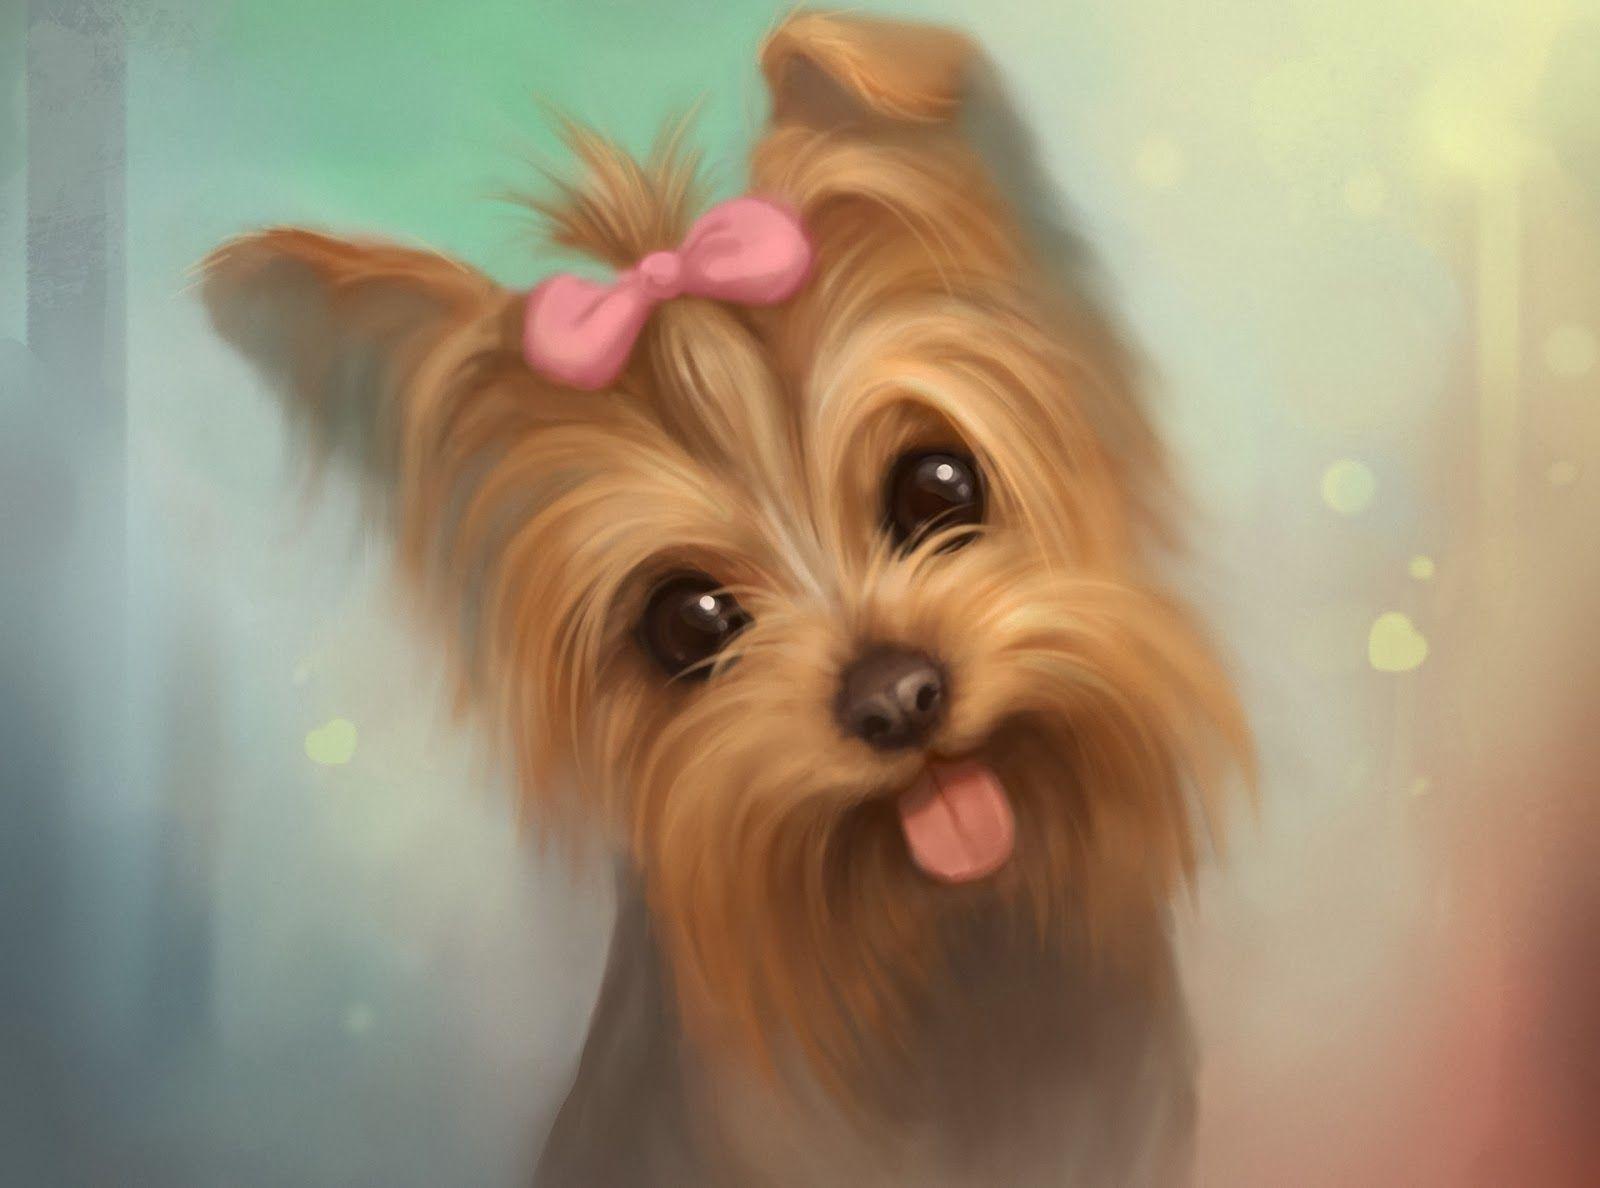 Cute puppy wallpaper for desktop. Yorkie painting, Yorkie dogs